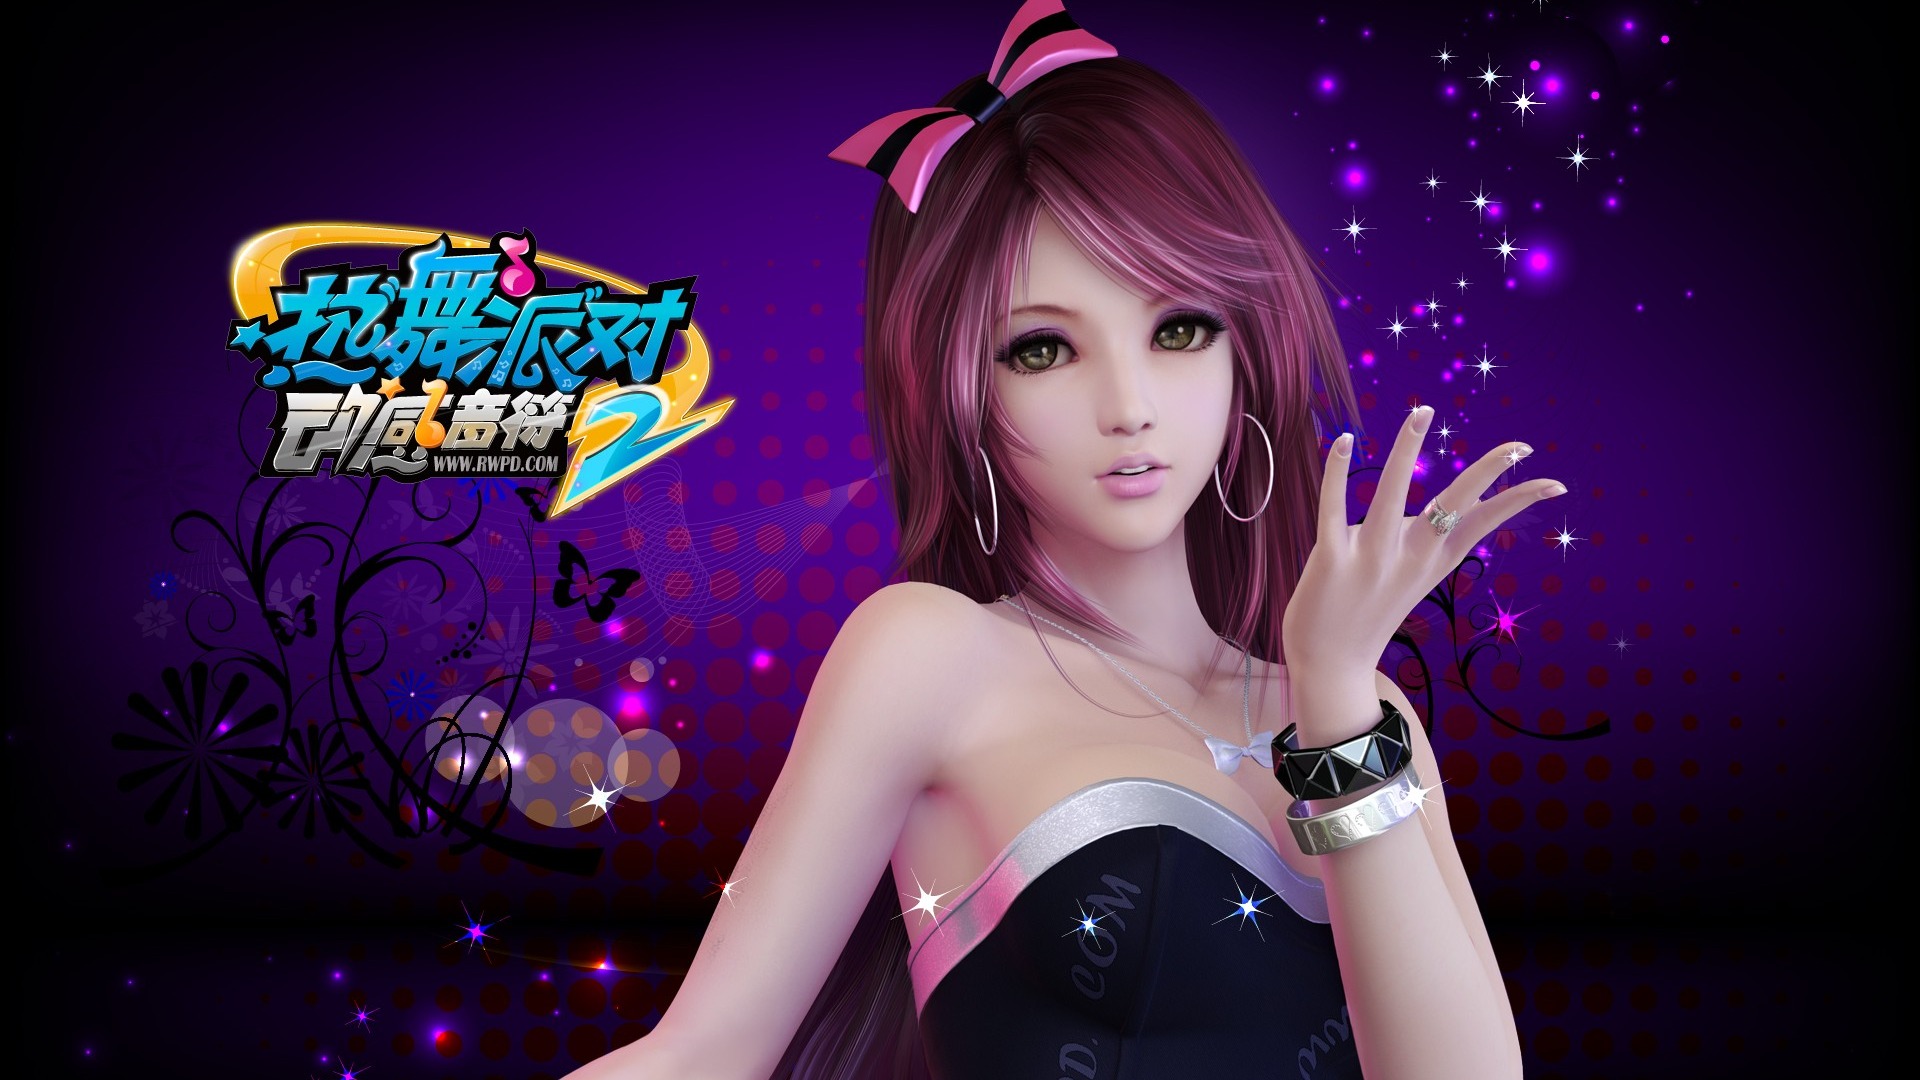 Online game Hot Dance Party II official wallpapers #33 - 1920x1080